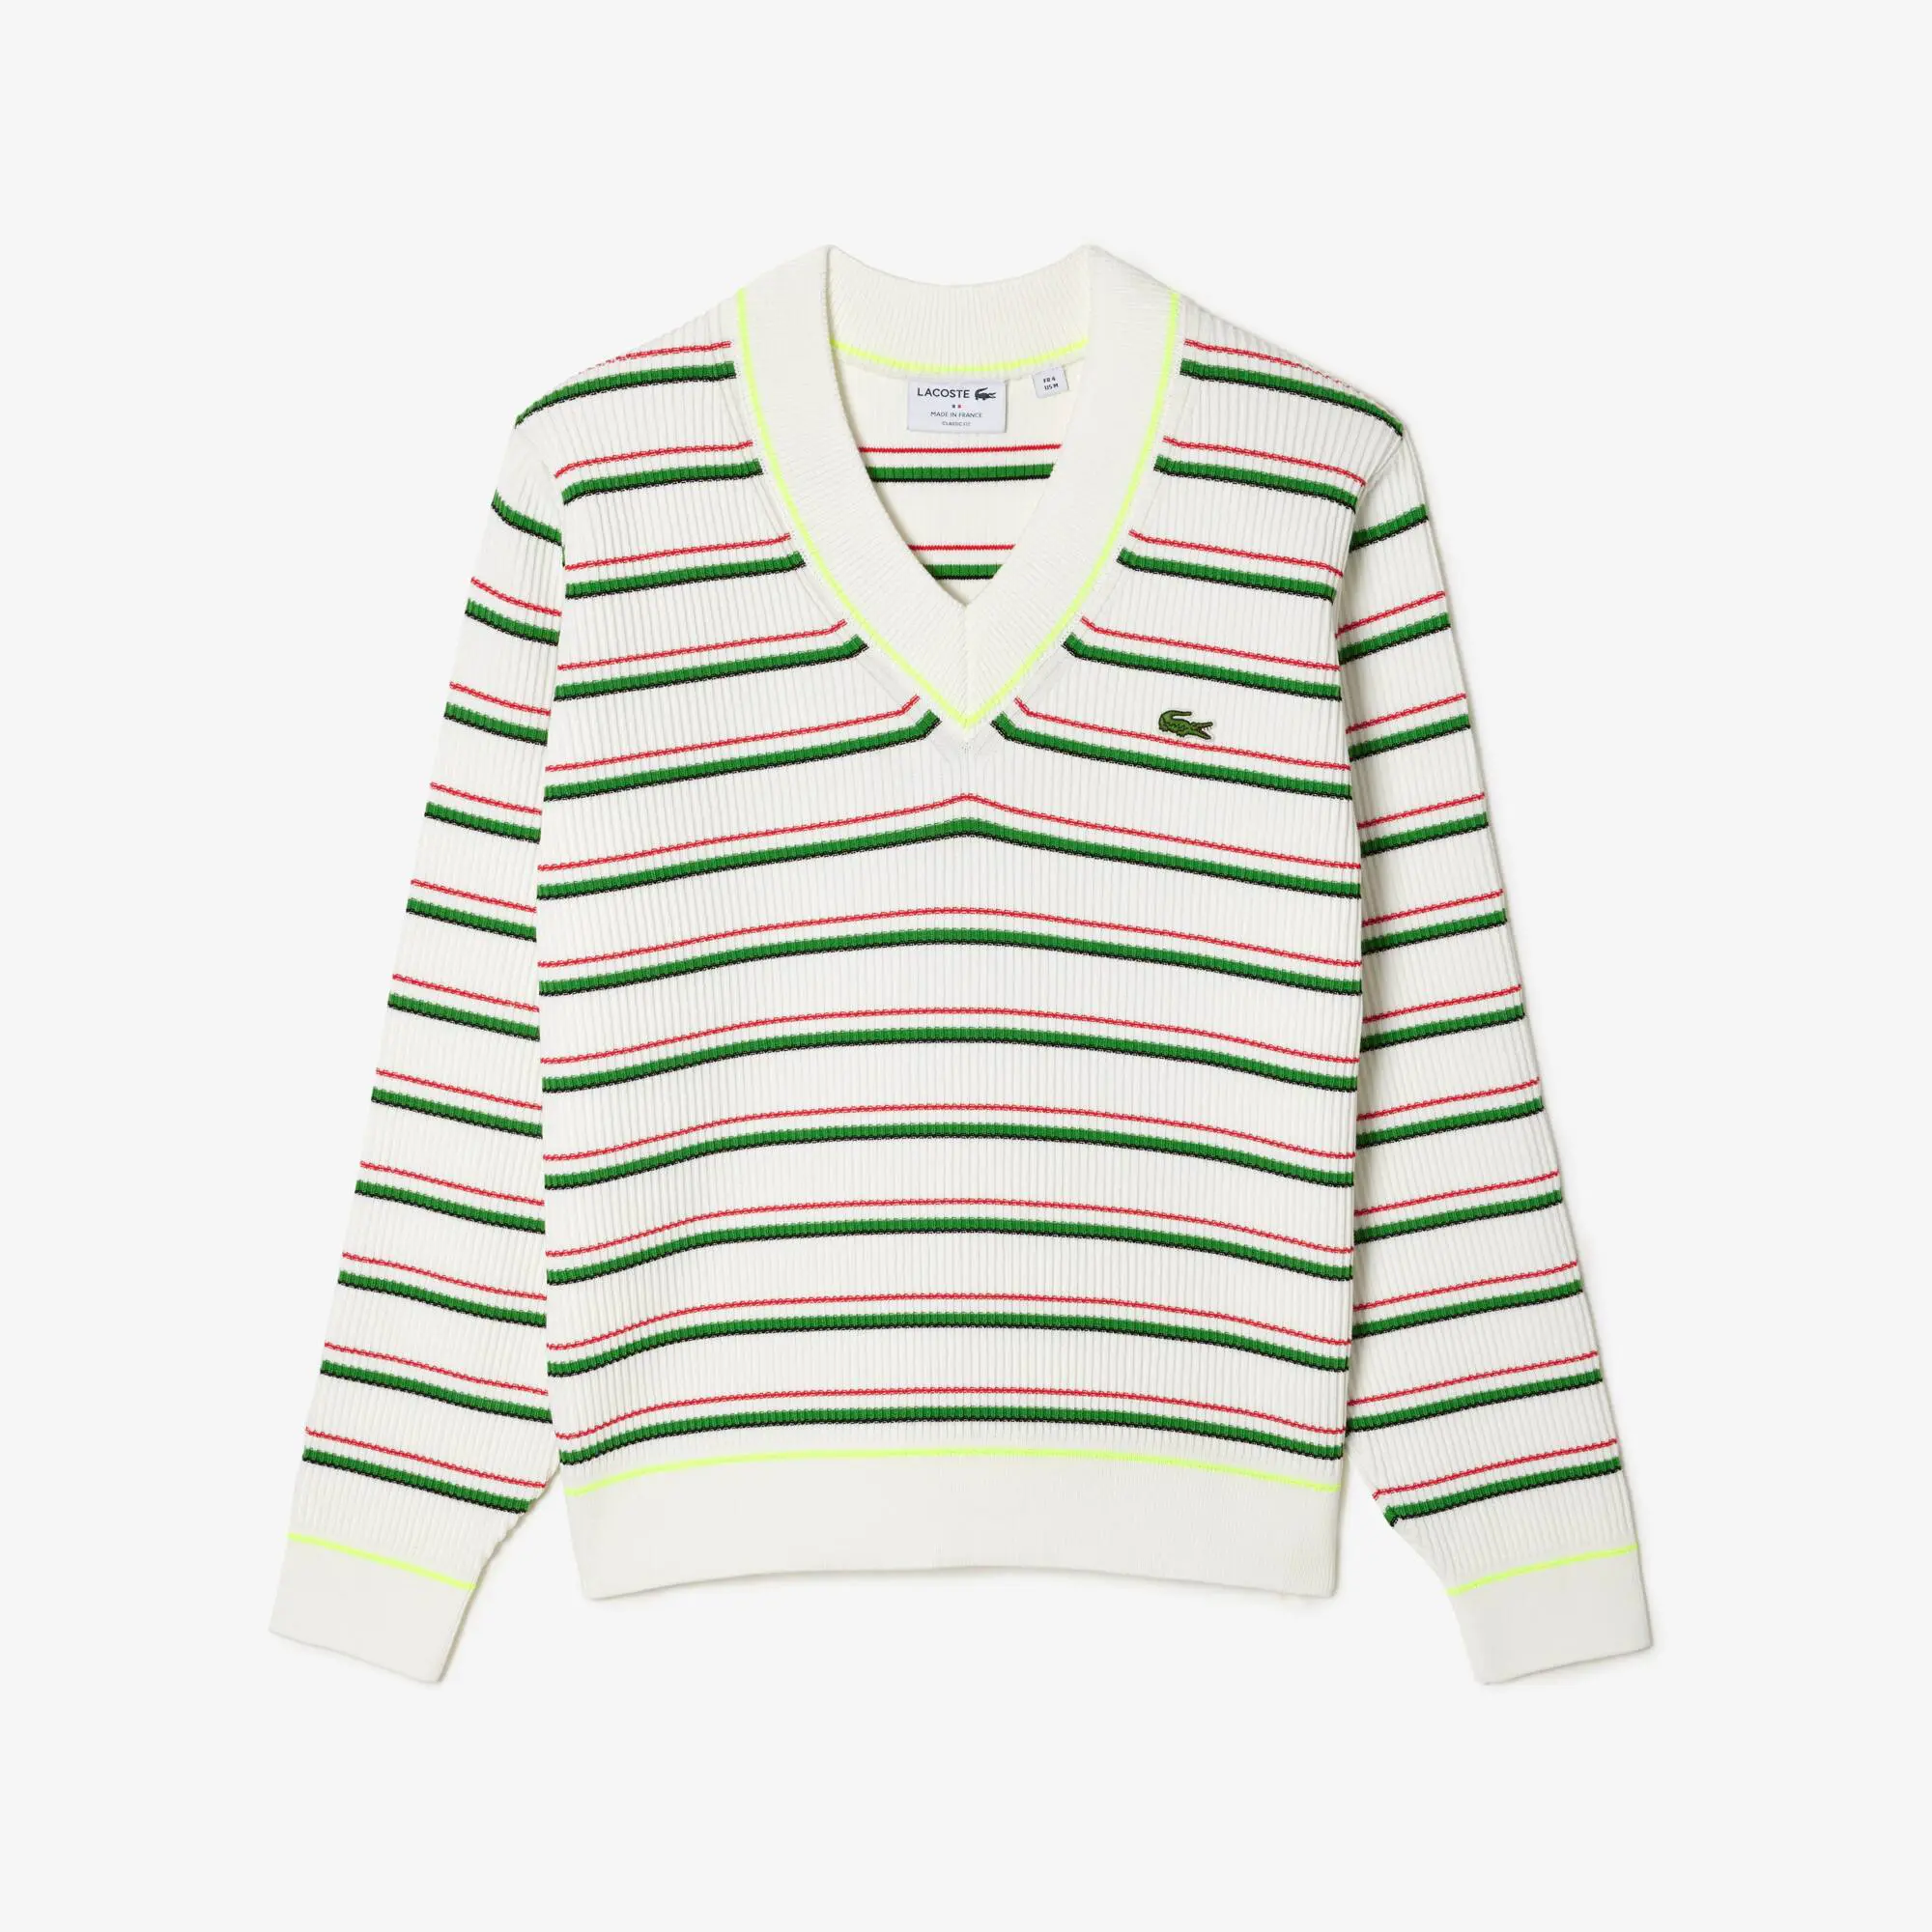 Lacoste Men’s Lacoste Striped French Made V-Neck Sweater. 2